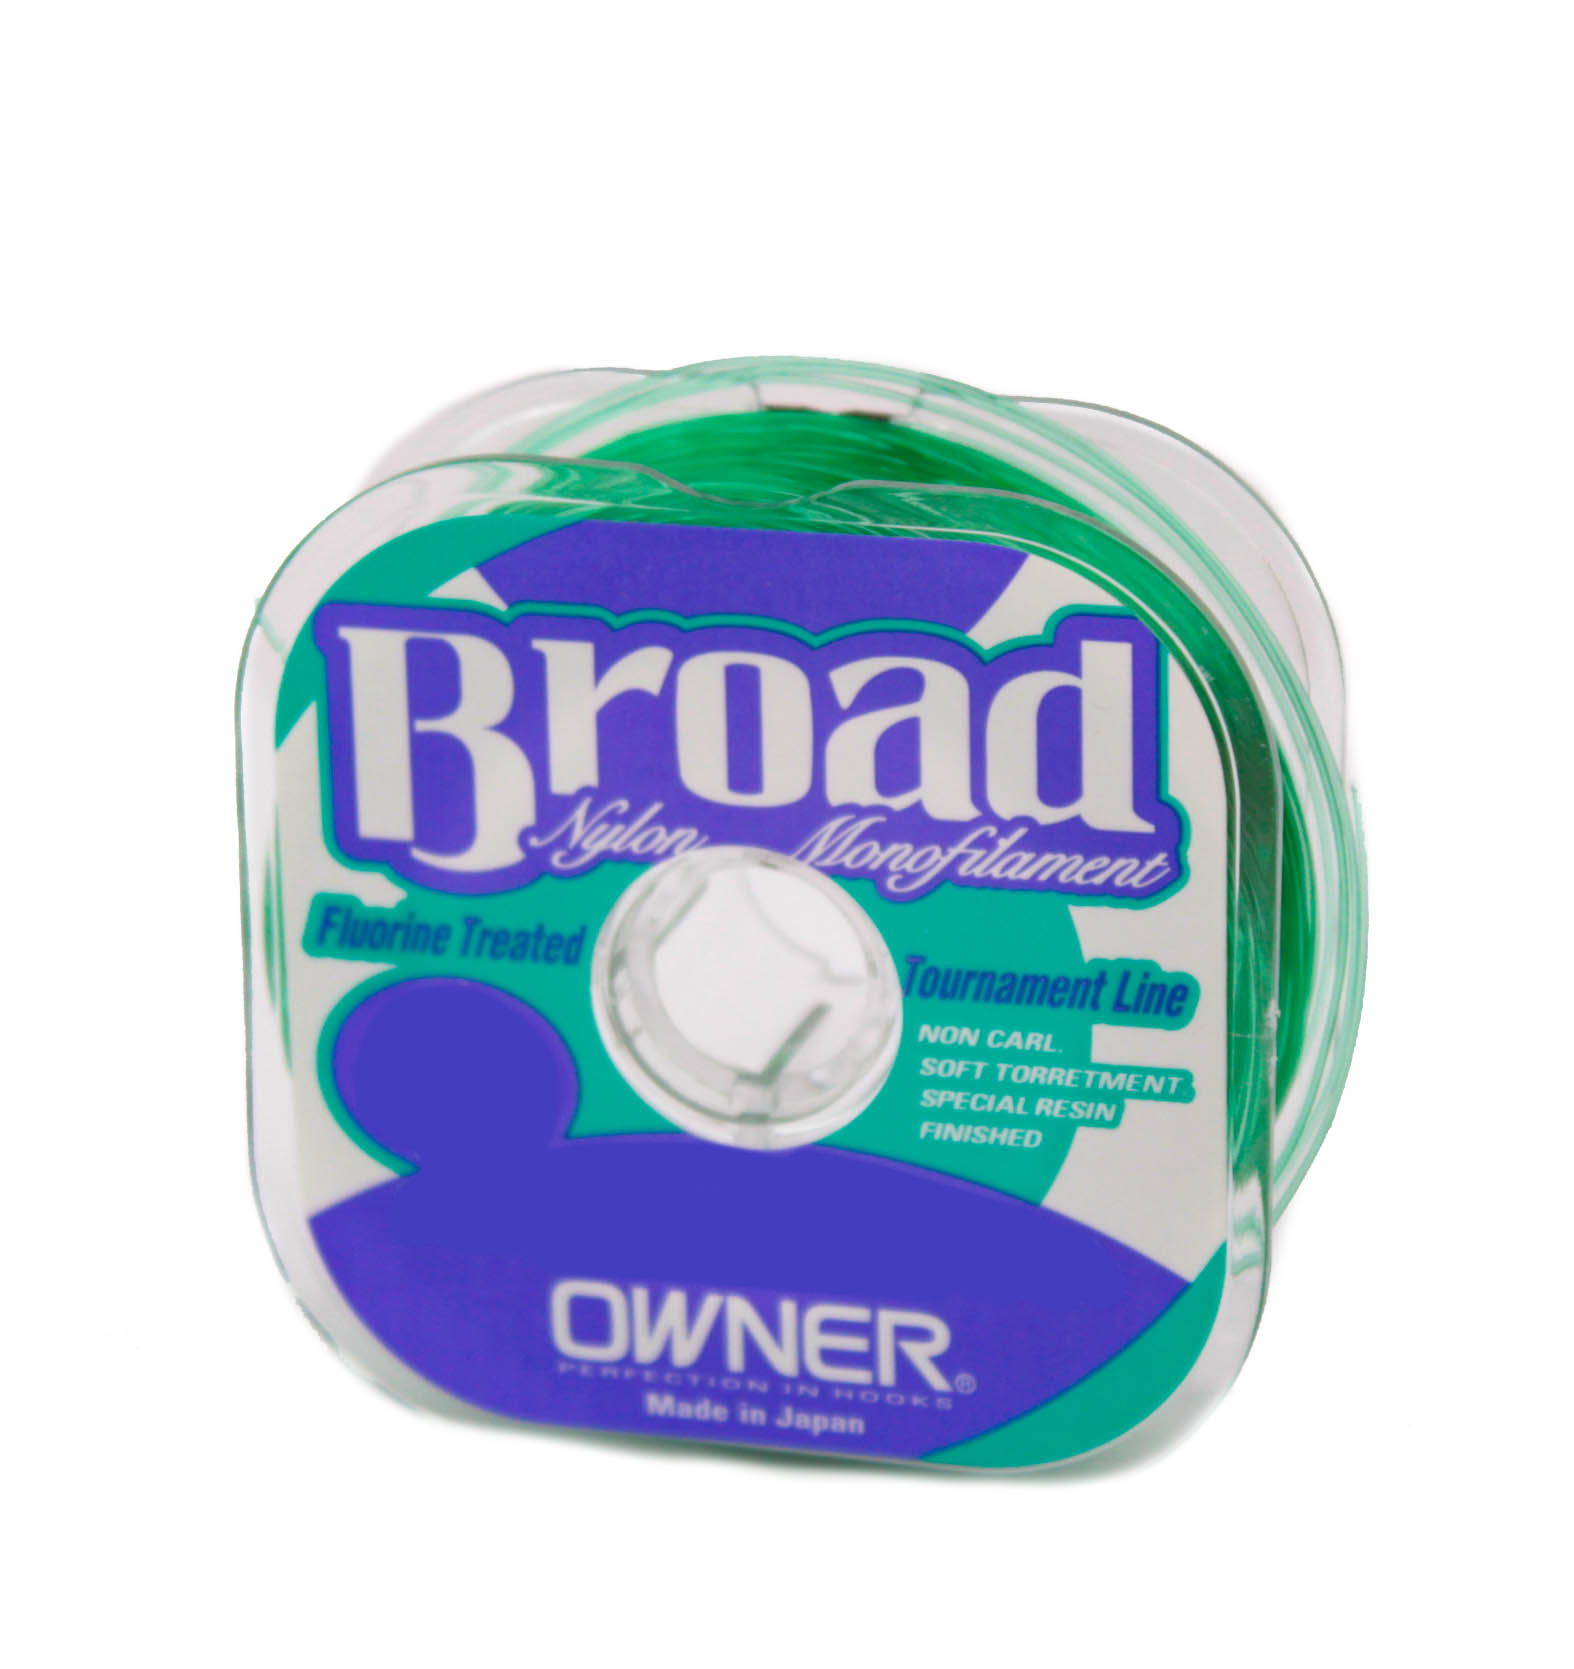 Леска Owner Broad Natural Clear 100м 0,50мм